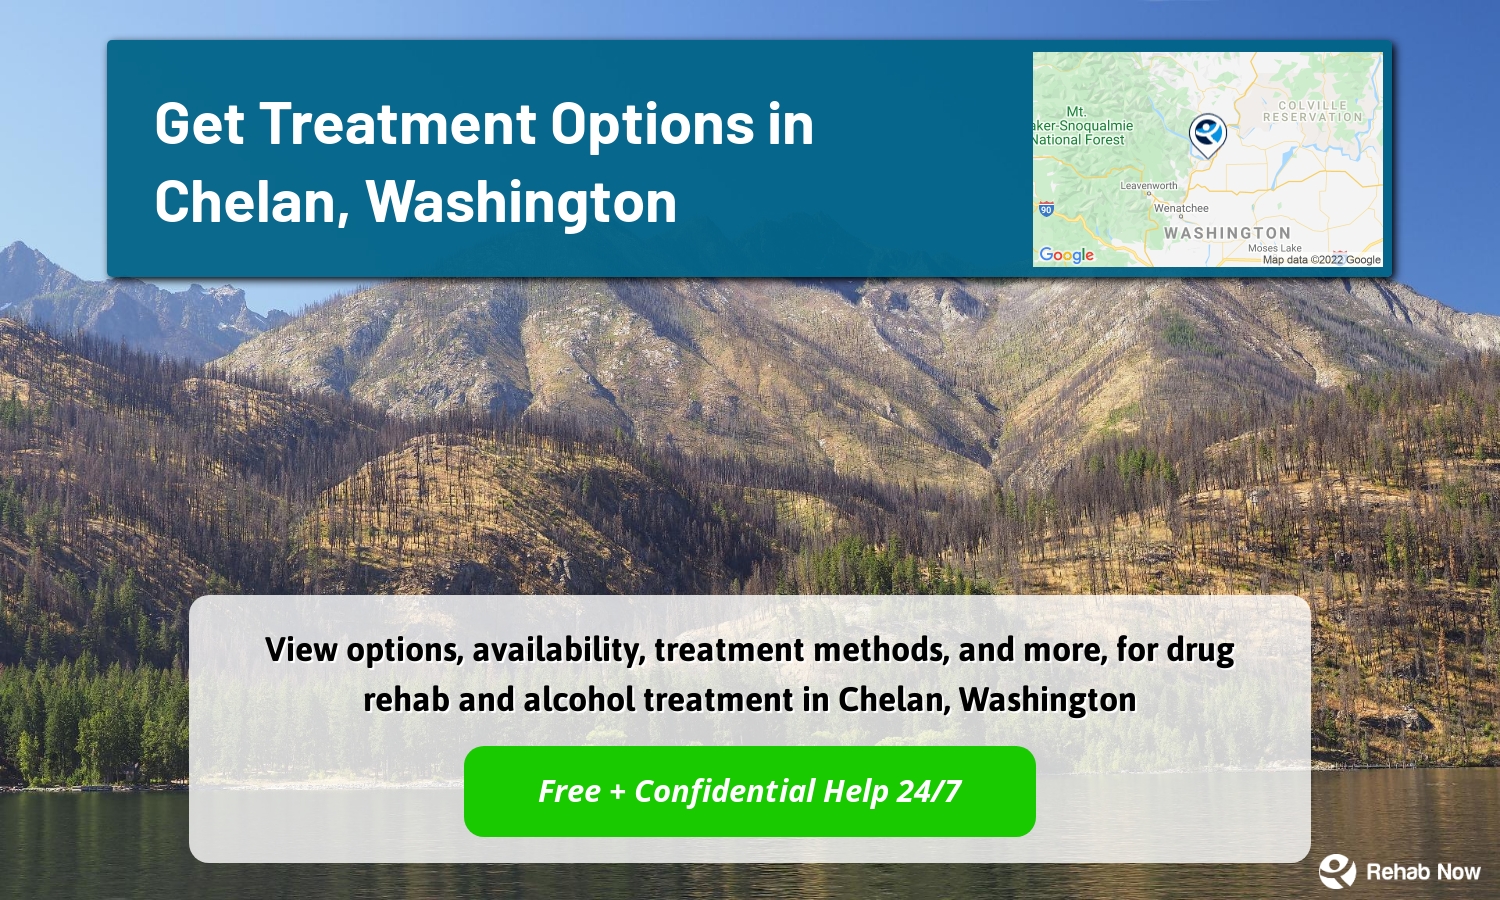 View options, availability, treatment methods, and more, for drug rehab and alcohol treatment in Chelan, Washington